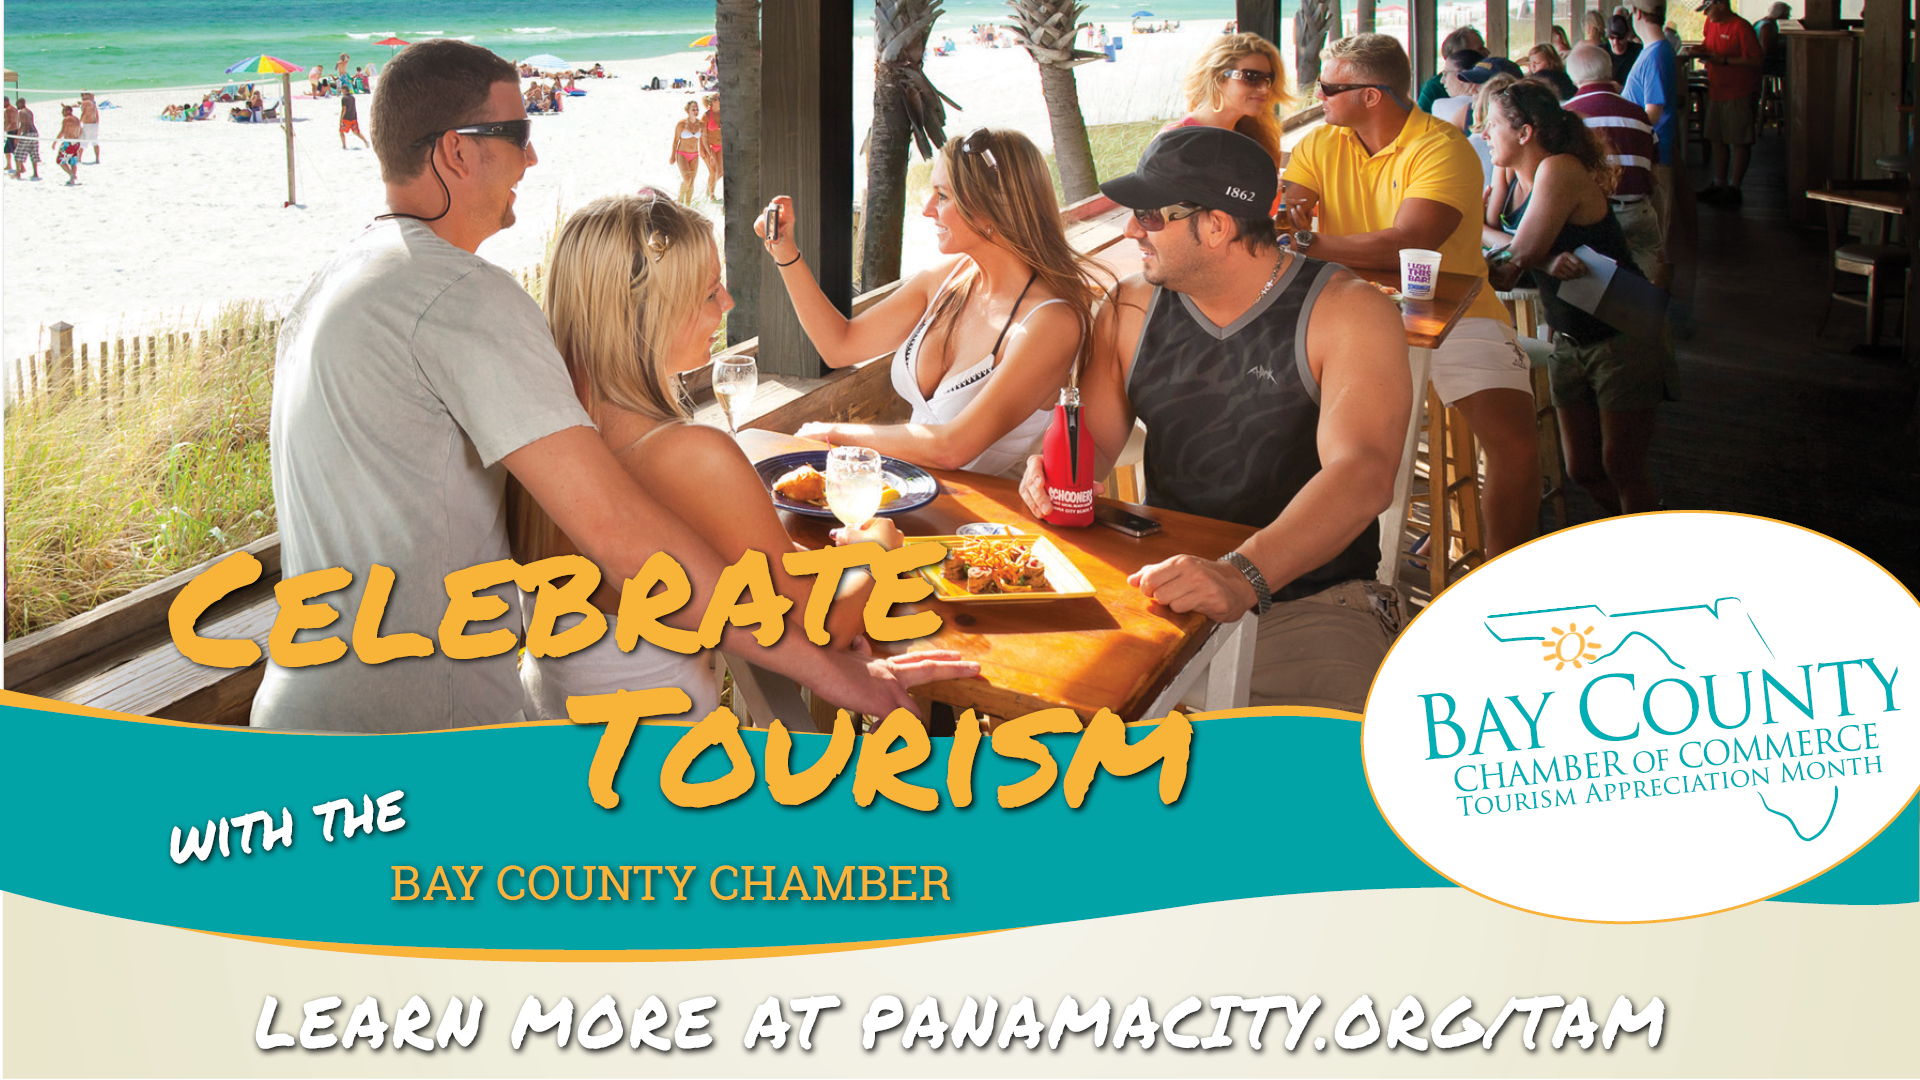 Photo of a group of friends eating at a restaurant on the beach with Bay County Chamber Tourism Logo and words: Celebrate Tourism with the Bay County CHamber